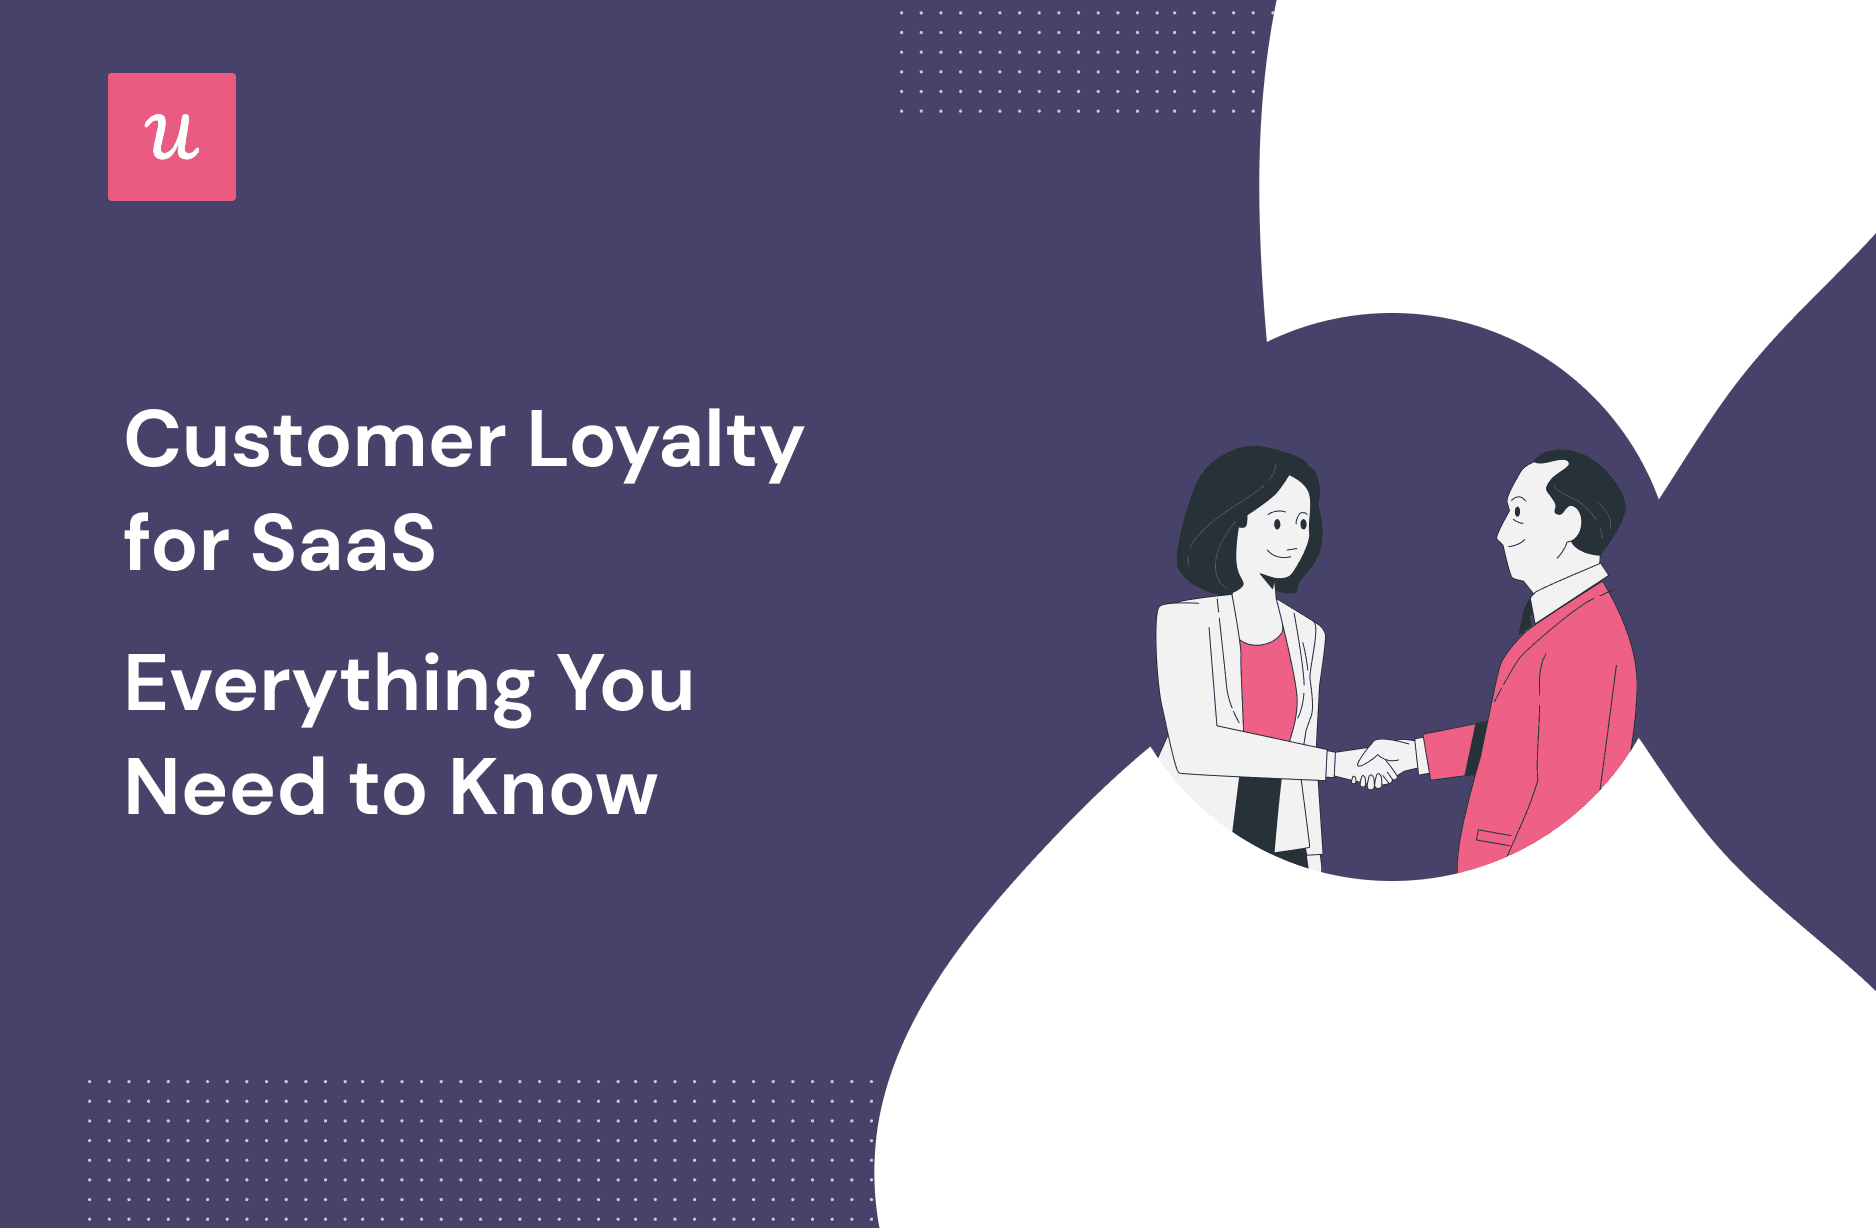 Customer Loyalty For SaaS- Everything You Need to Know cover